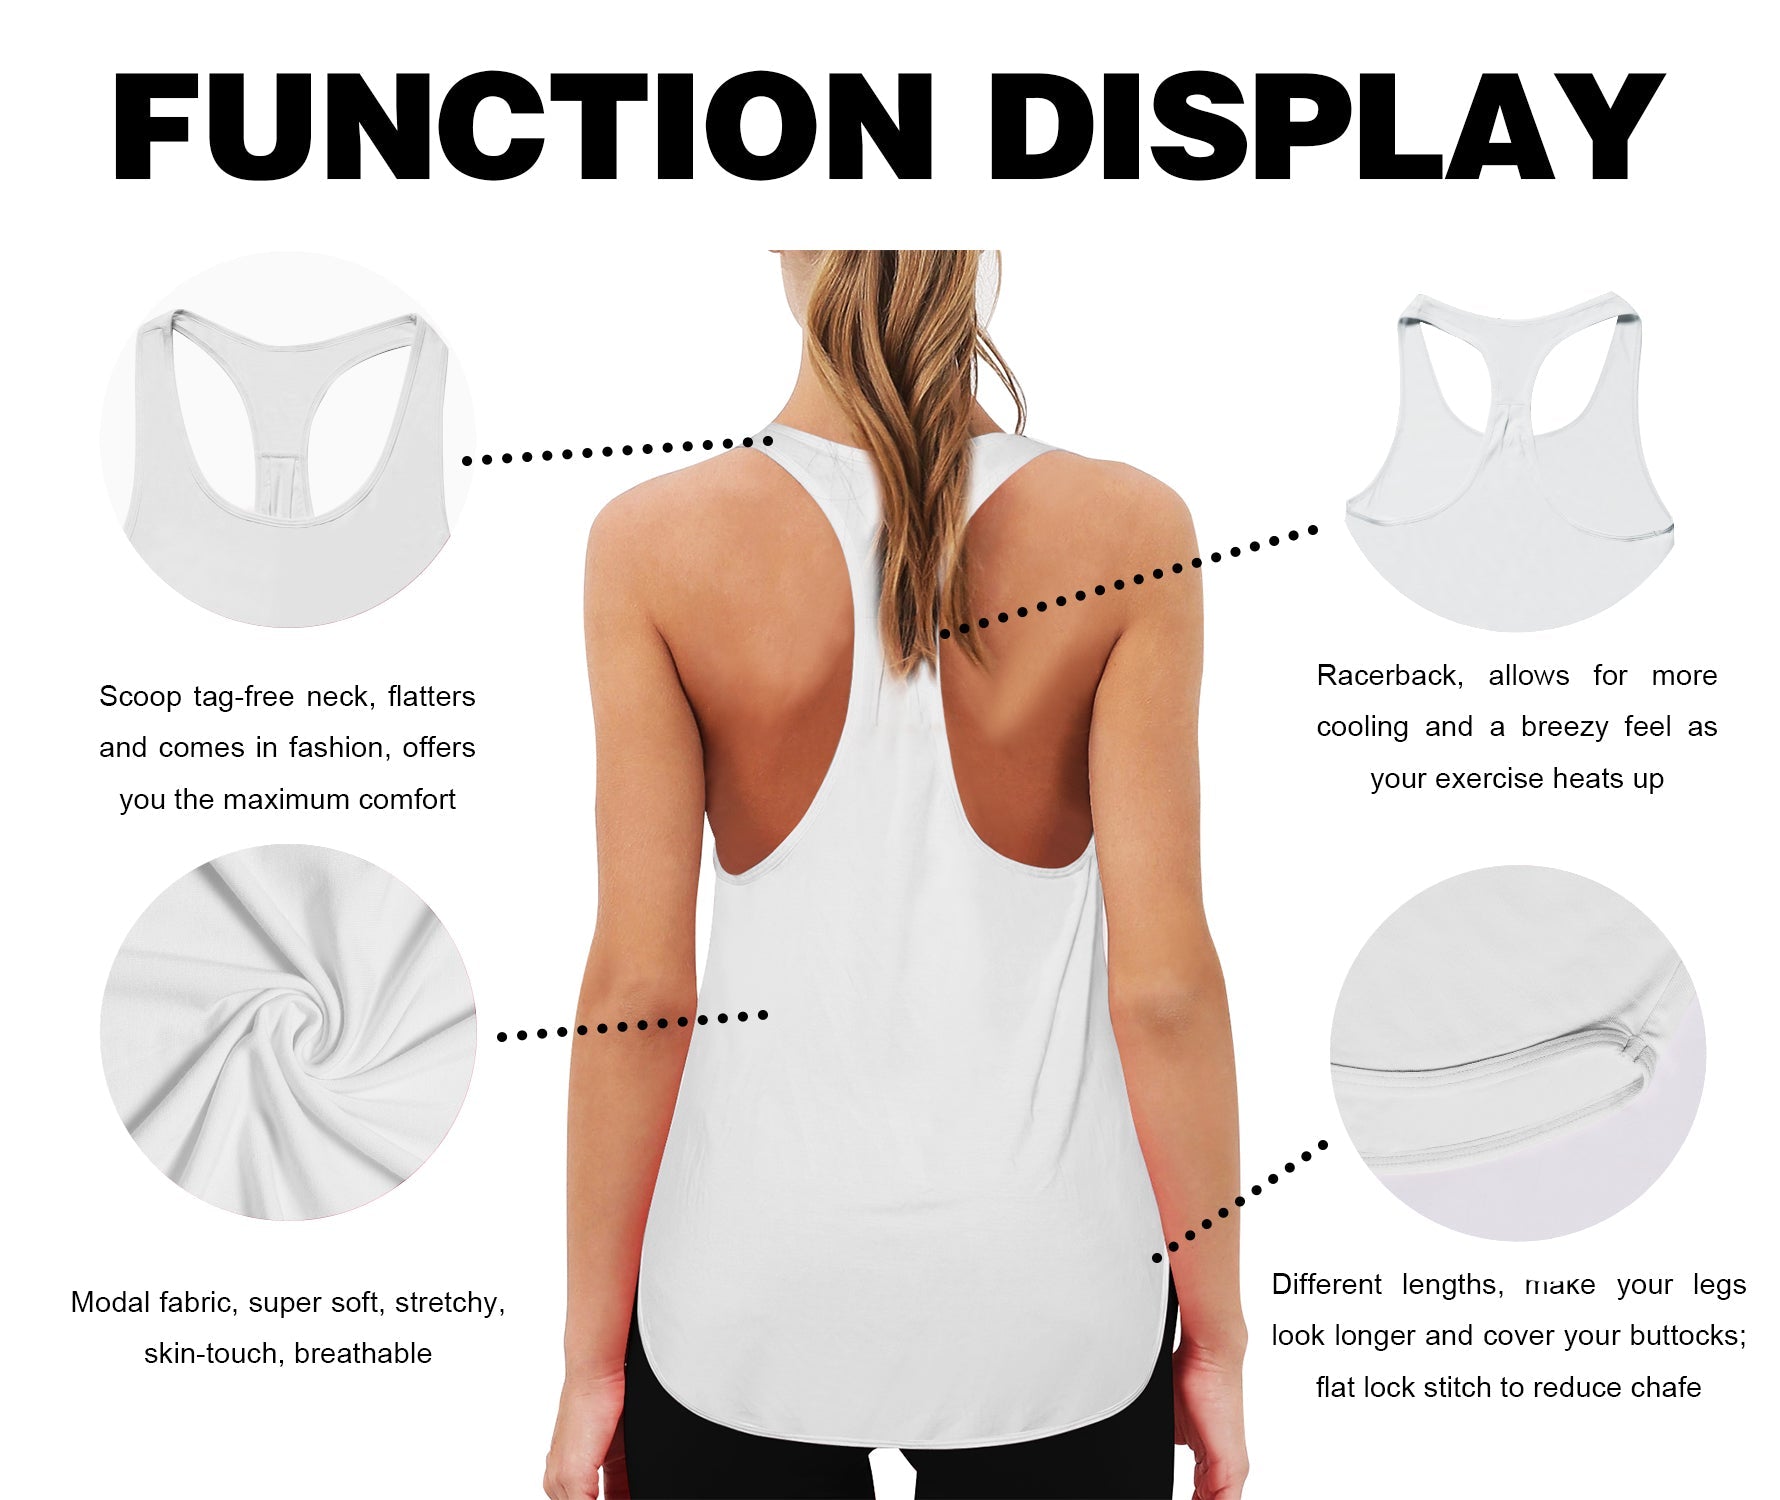 Loose Fit Racerback Tank Top white Designed for On the Move Loose fit 93%Modal/7%Spandex Four-way stretch Naturally breathable Super-Soft, Modal Fabric